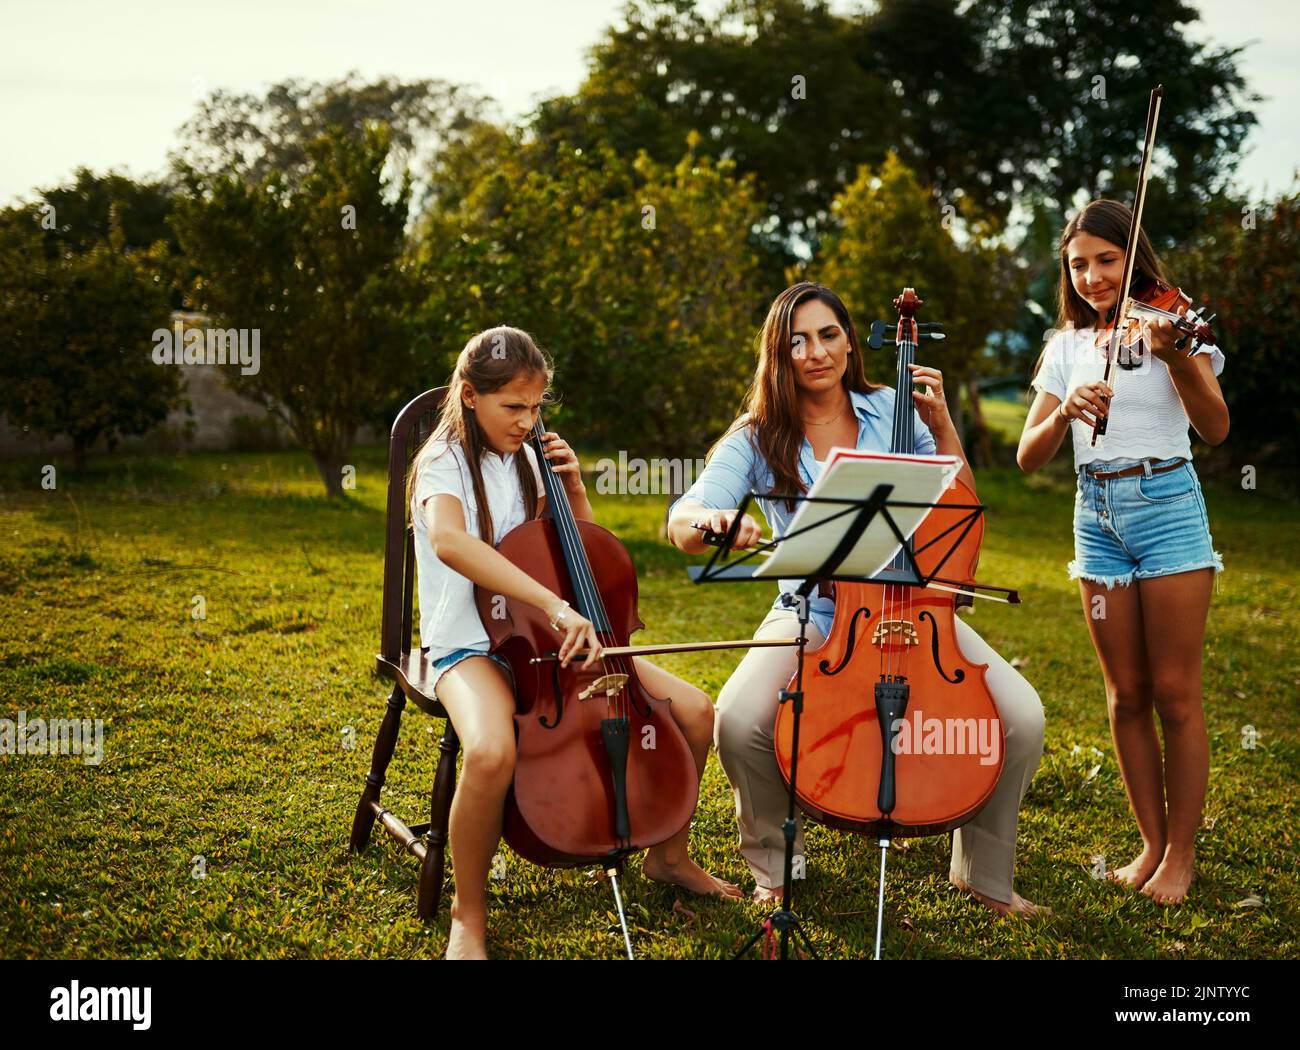 Moms the master musician and we follow her lead. a beautiful mother playing instruments with her adorable daughters outdoors. Stock Photo